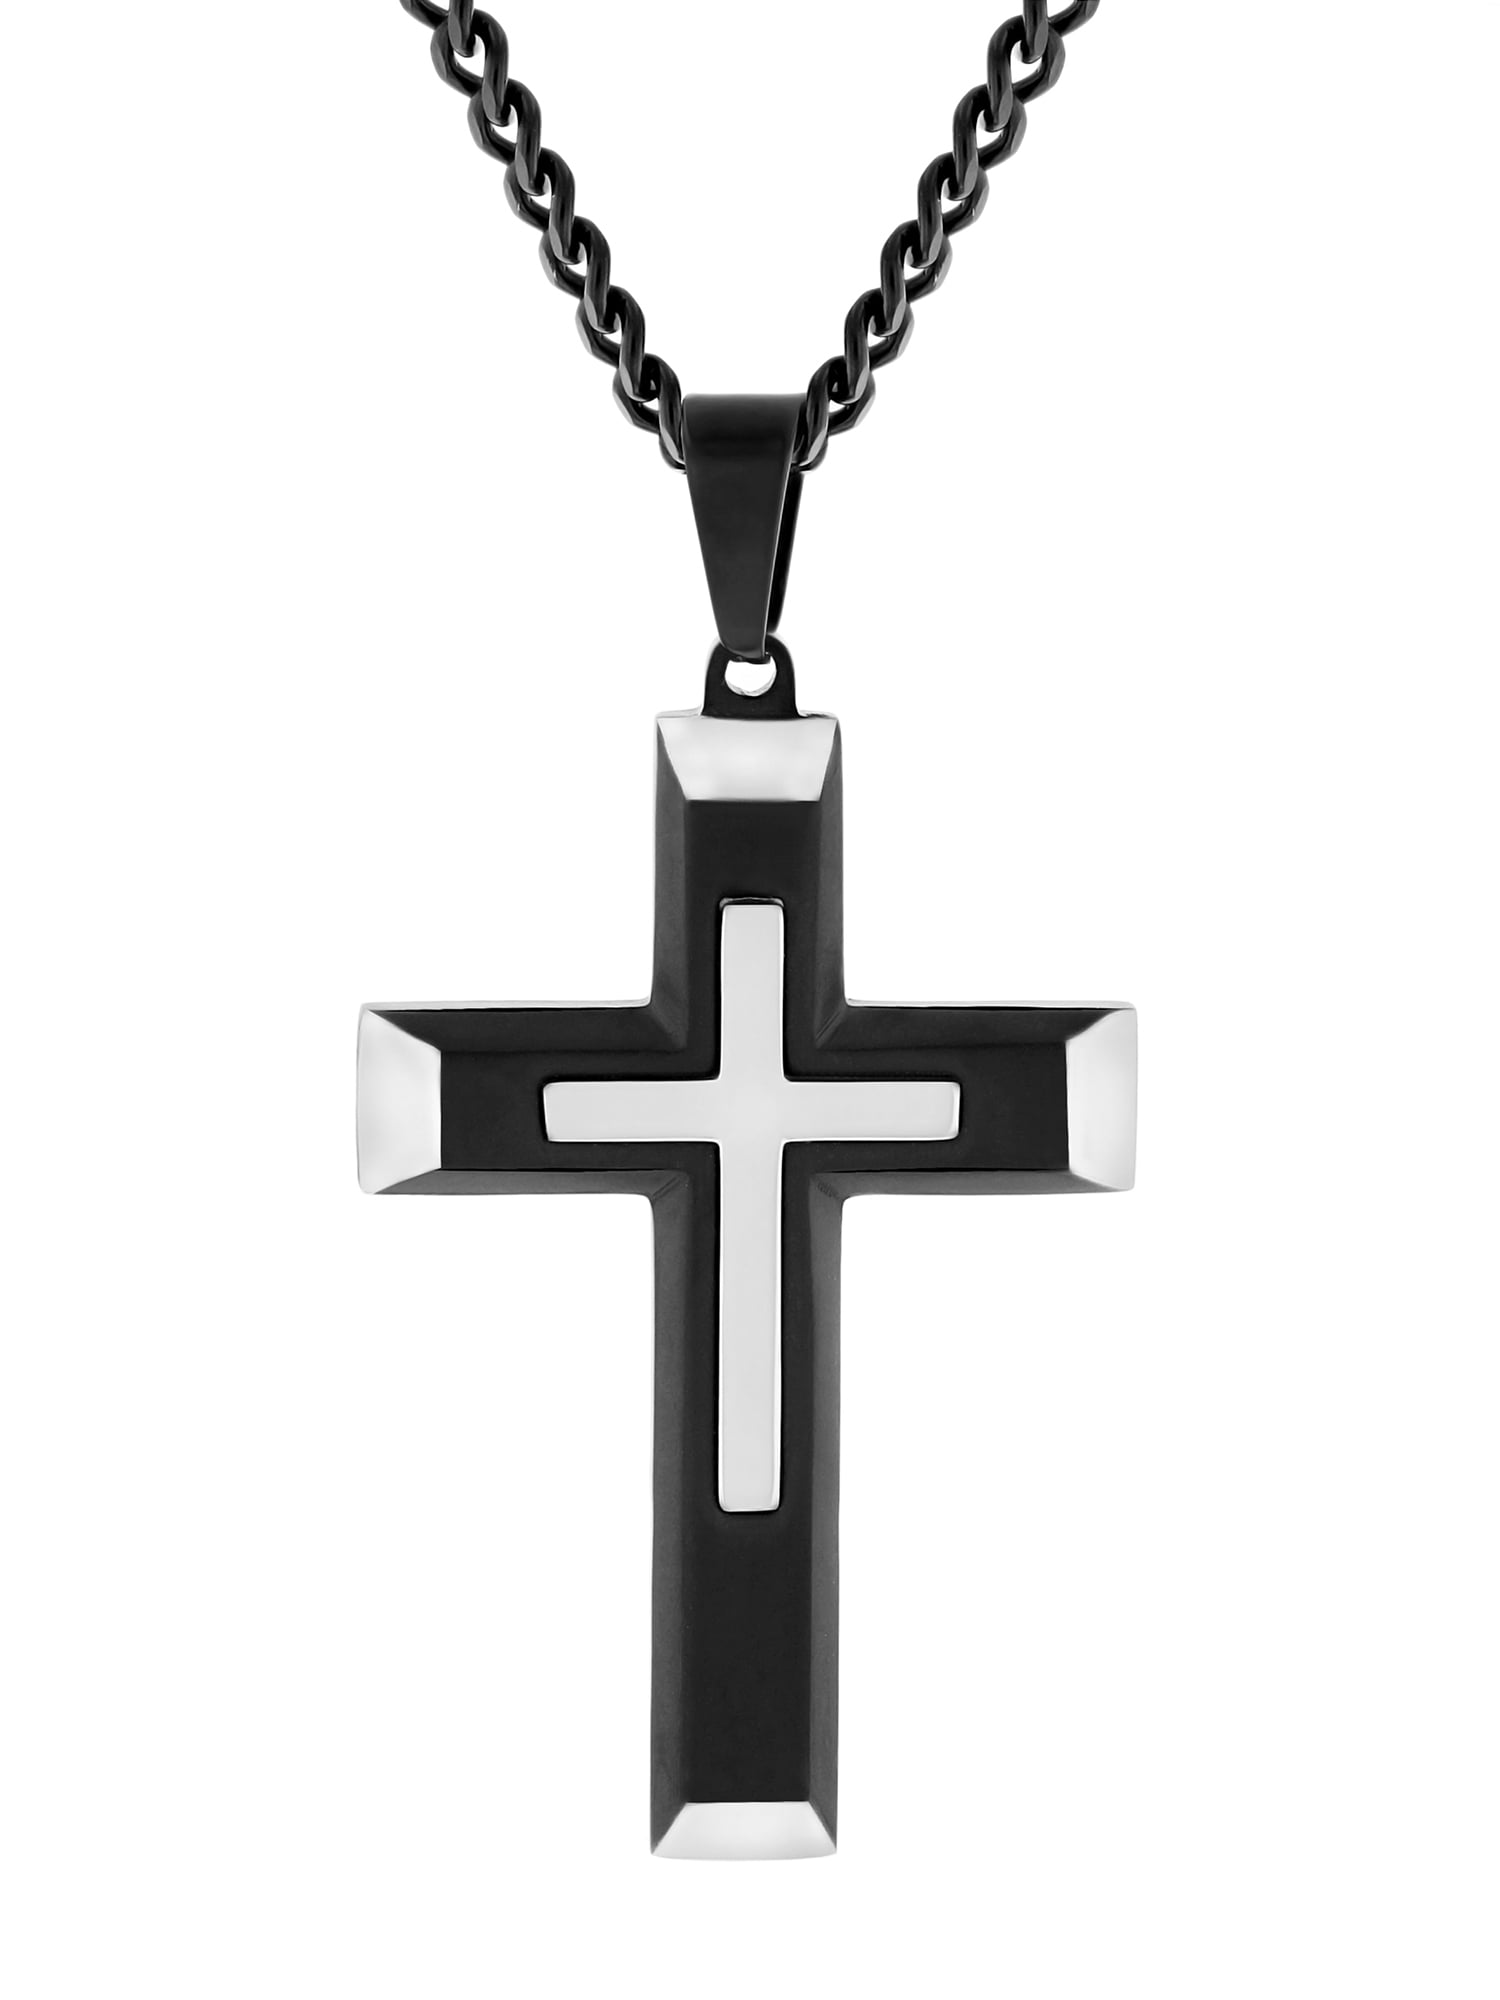 Believe by Brilliance Mens Stainless Steel Two Tone Stacked Cross Pendant Necklace Chain